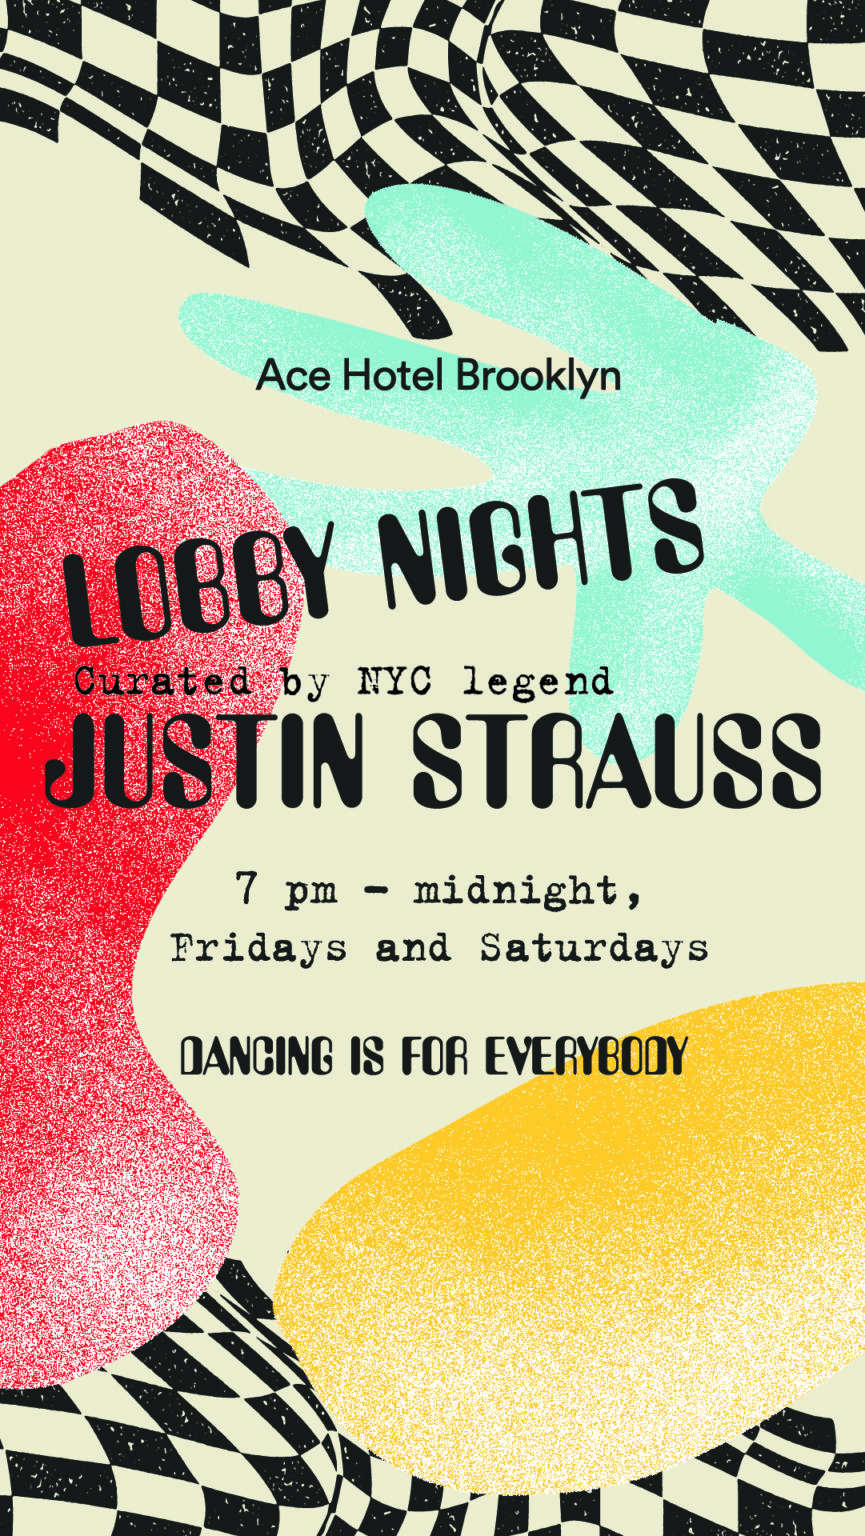 Lobby nights with Justin Strauss Ace Hotel